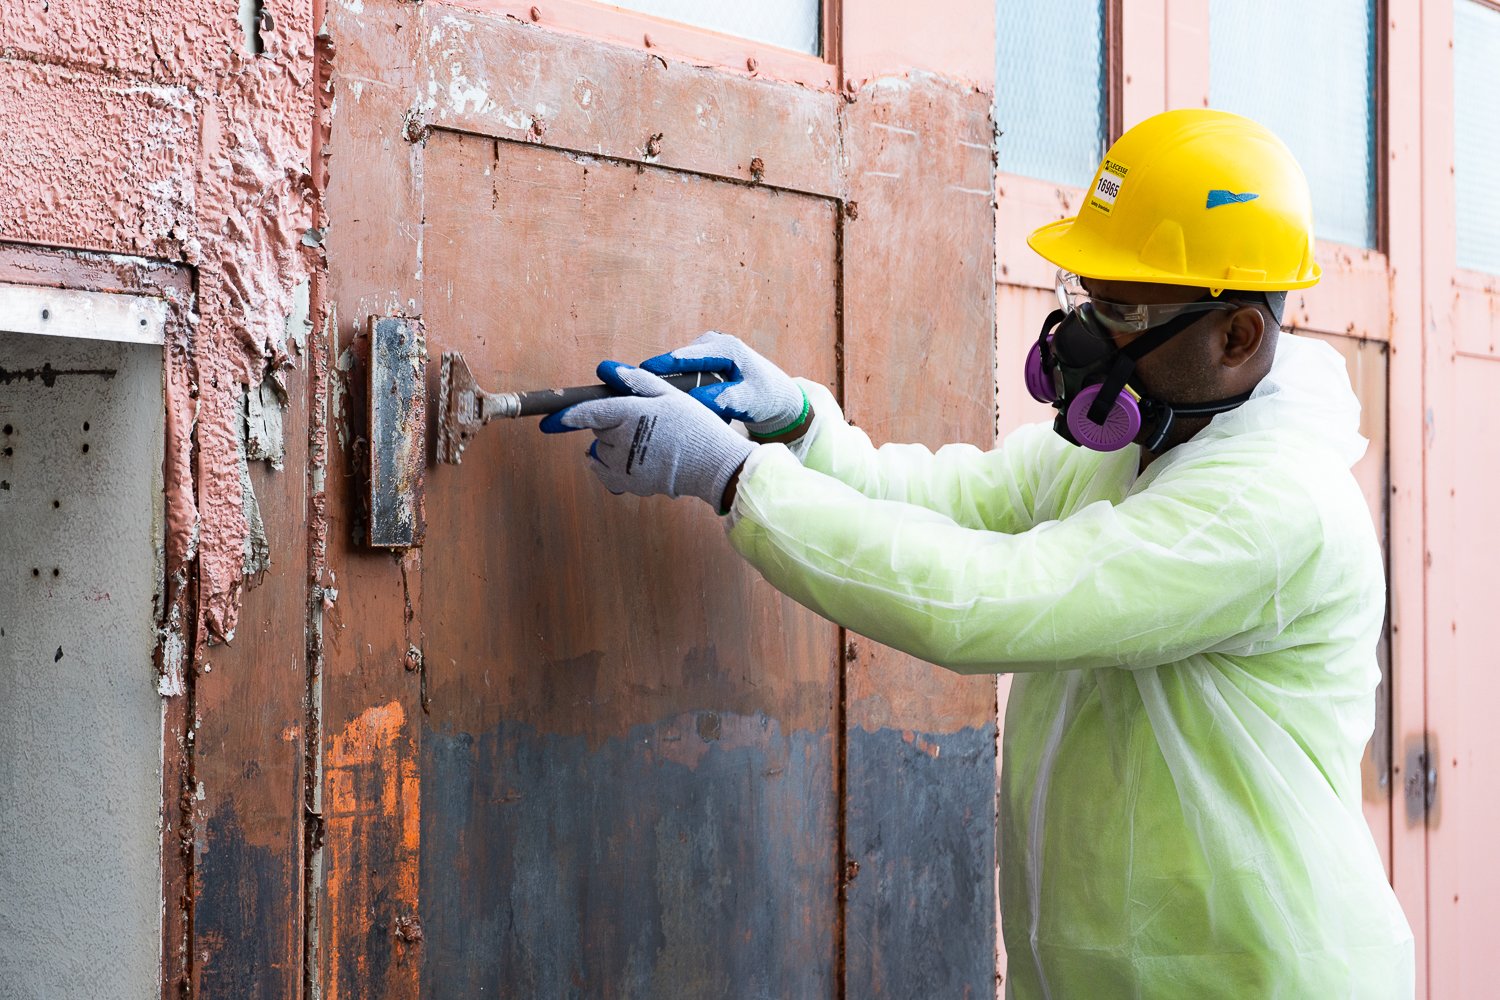 Wearing appropriate Personal Protective Equipment (PPE), a worker scrapes lead contaminated paint. 